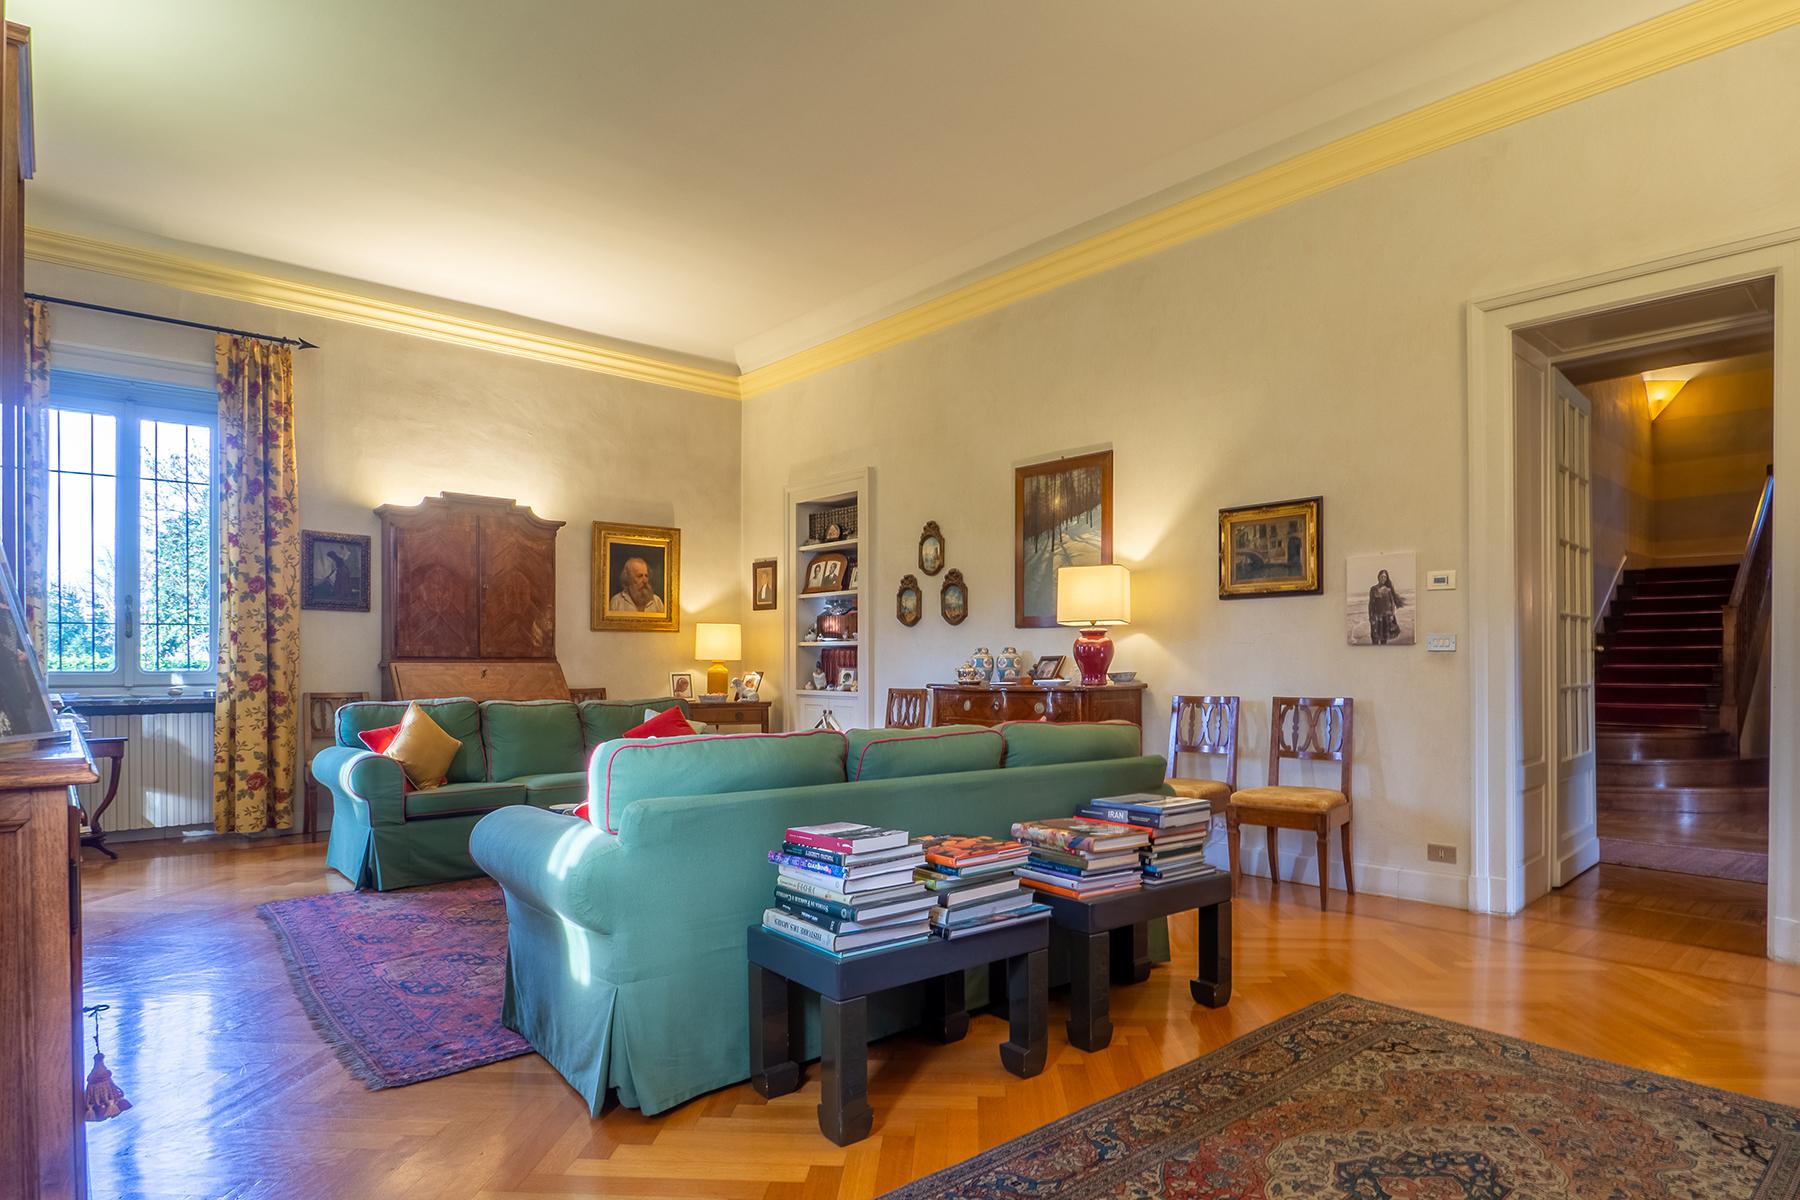 Exquisite villa with swimming pool in the hill of Turin - 8